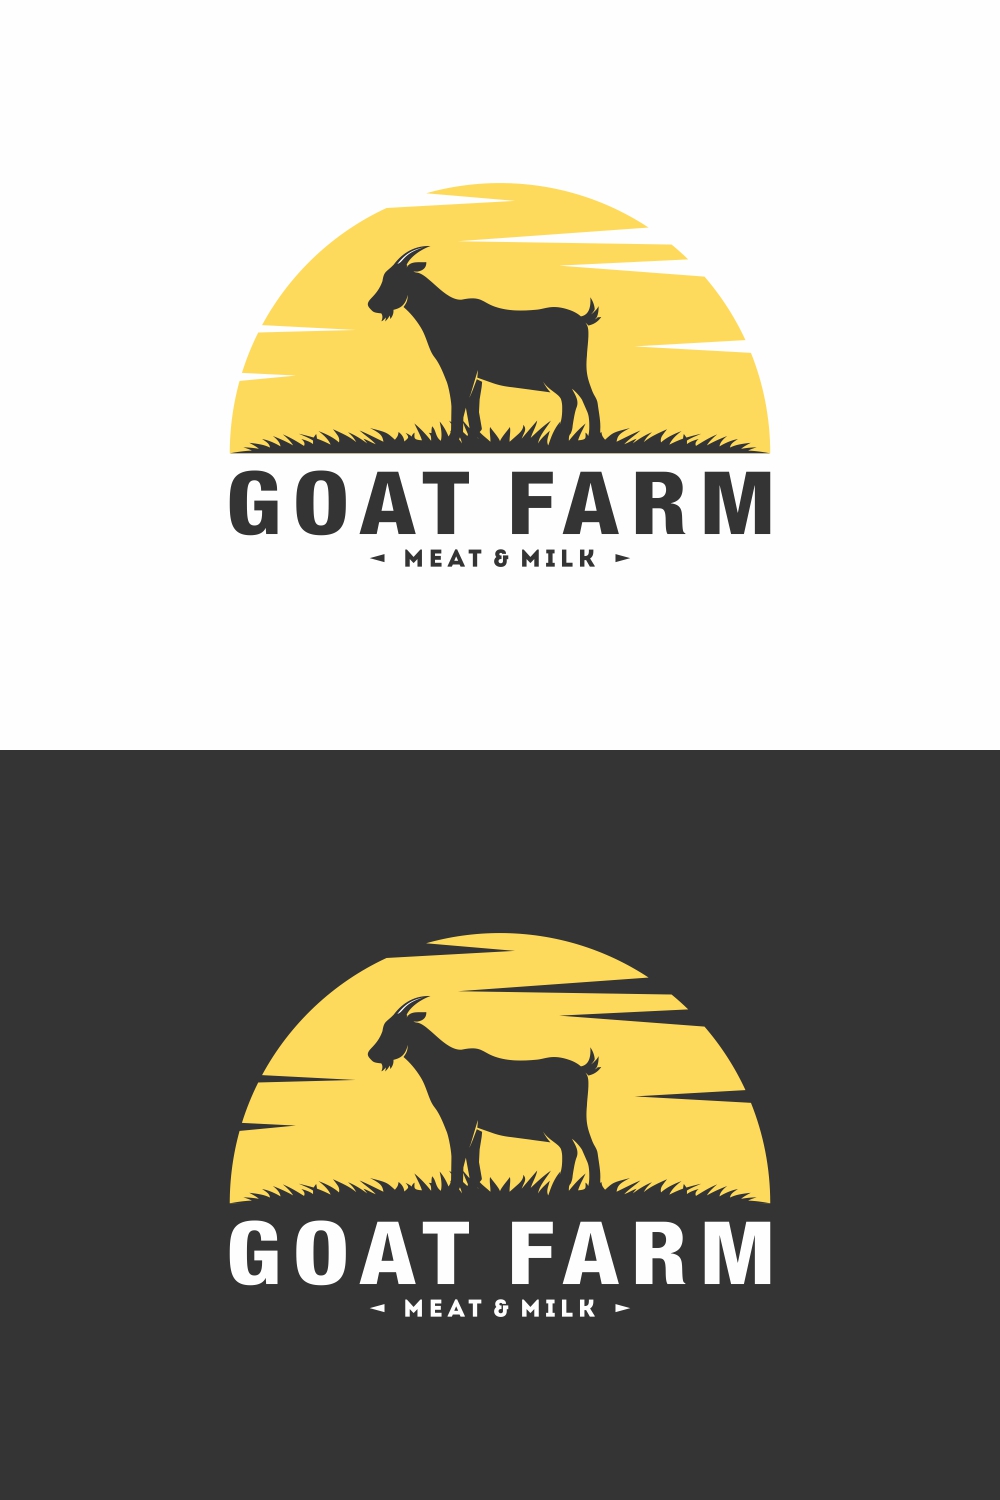 Goat Farm logo design collection - only 8$ pinterest preview image.